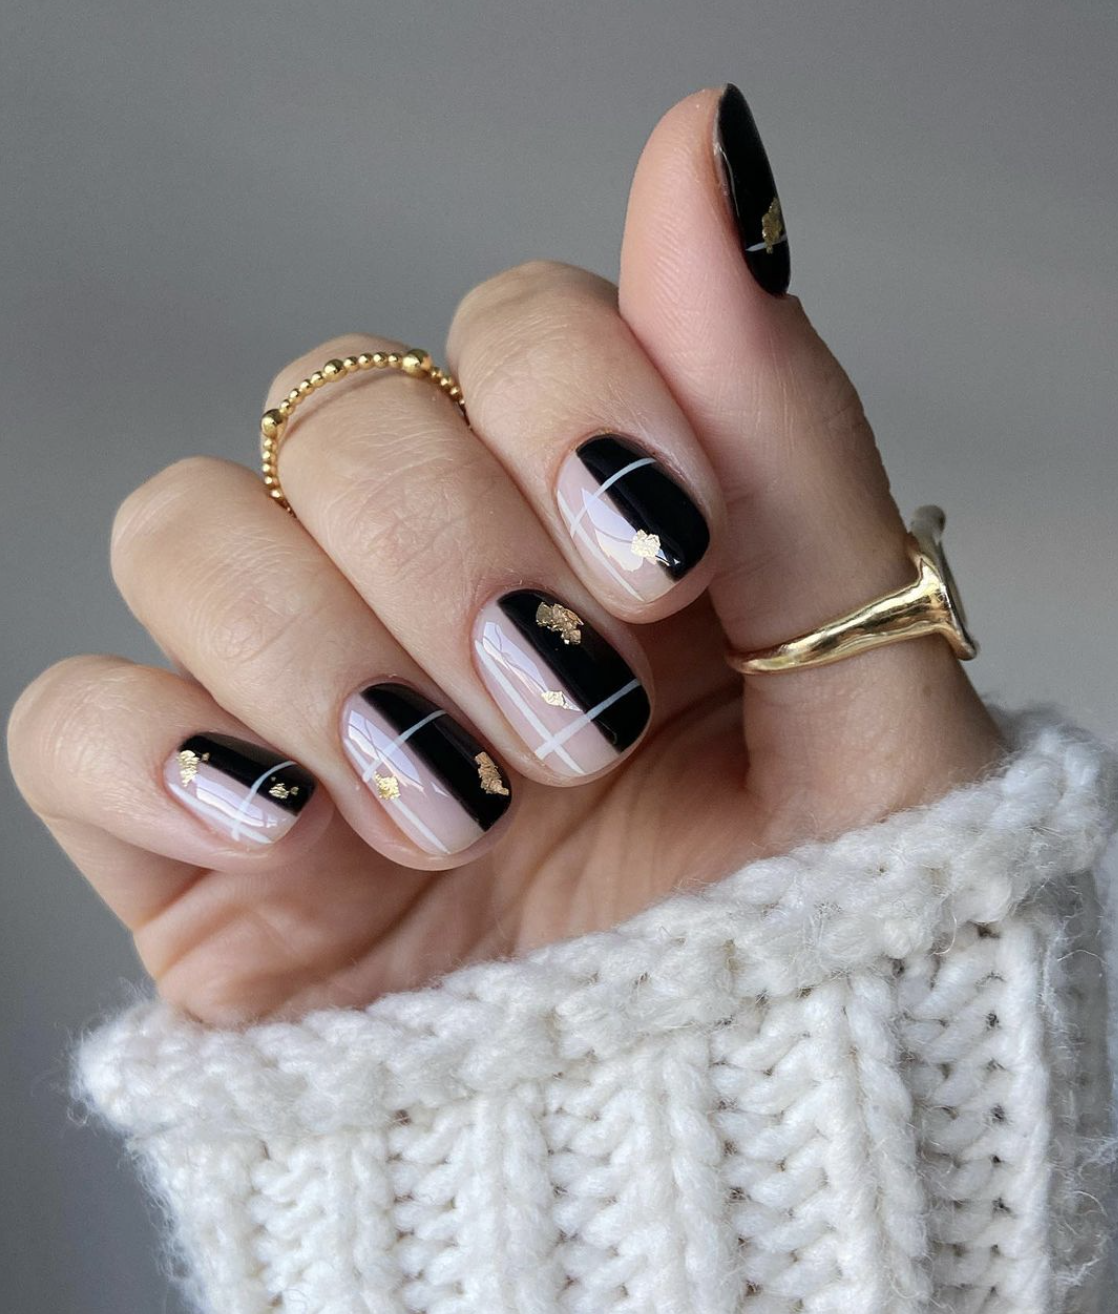 New years nail designs: dare to wear simple or sparkling nails!